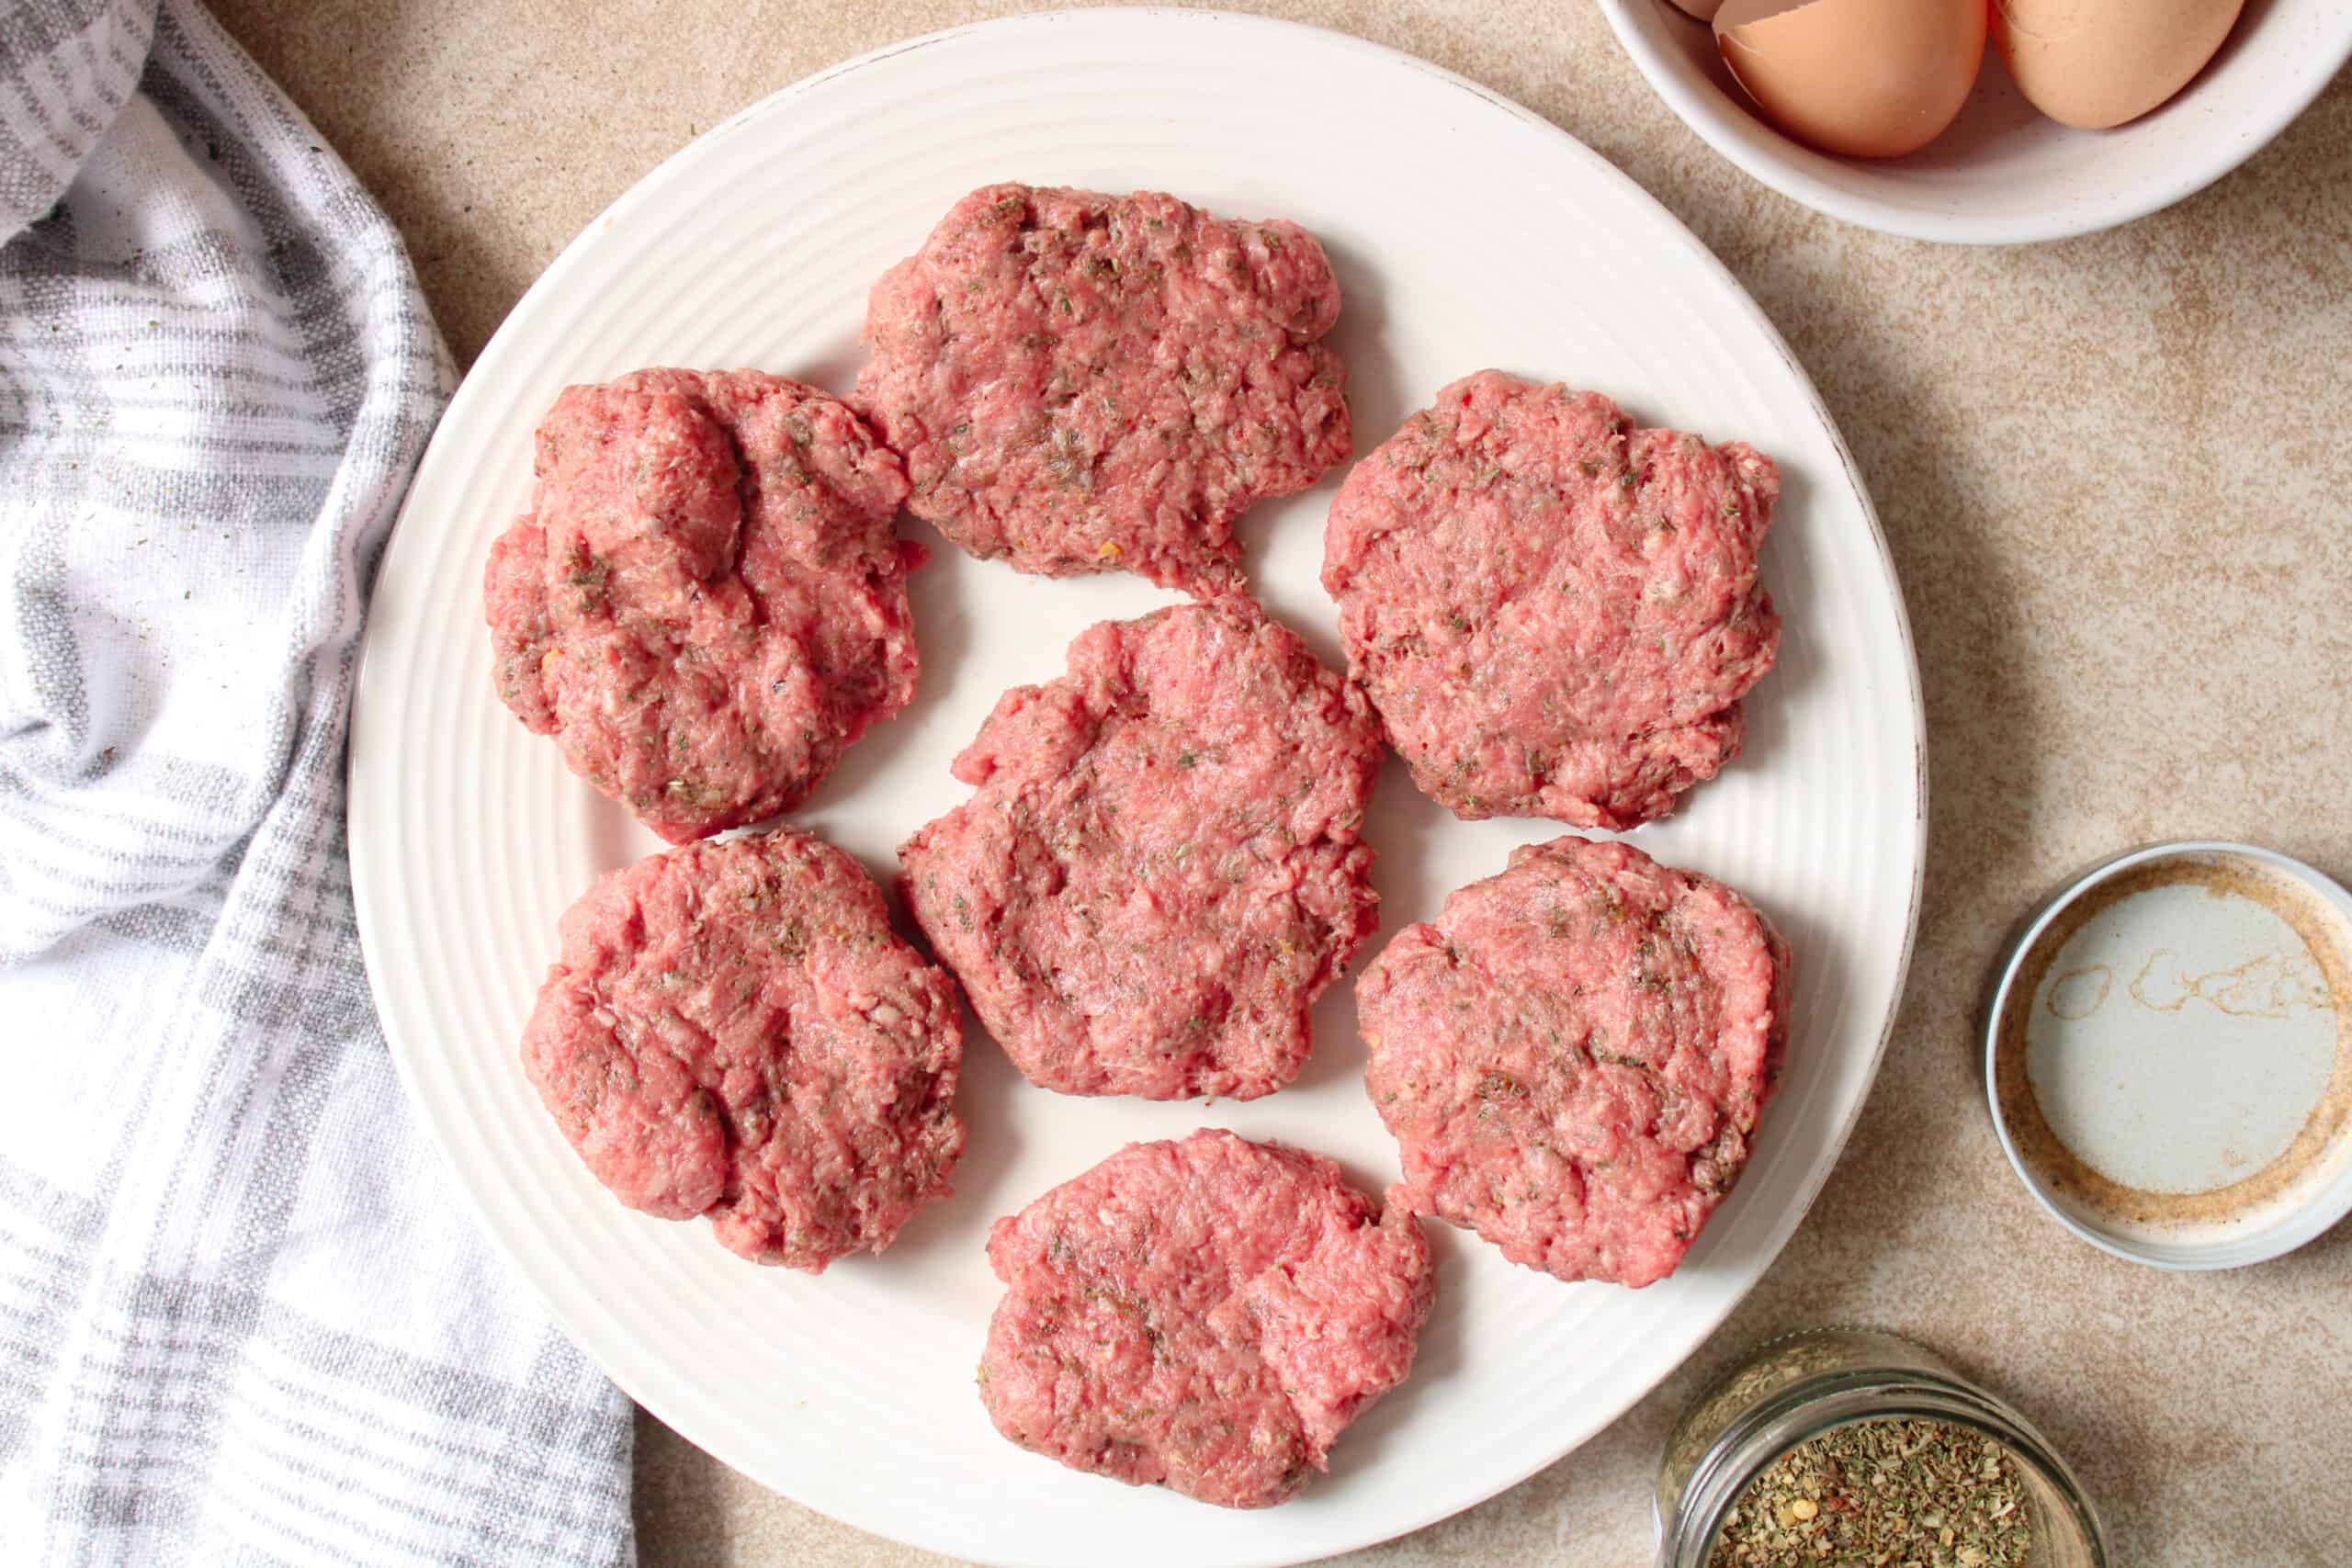 Raw ground beef patties on a plate.